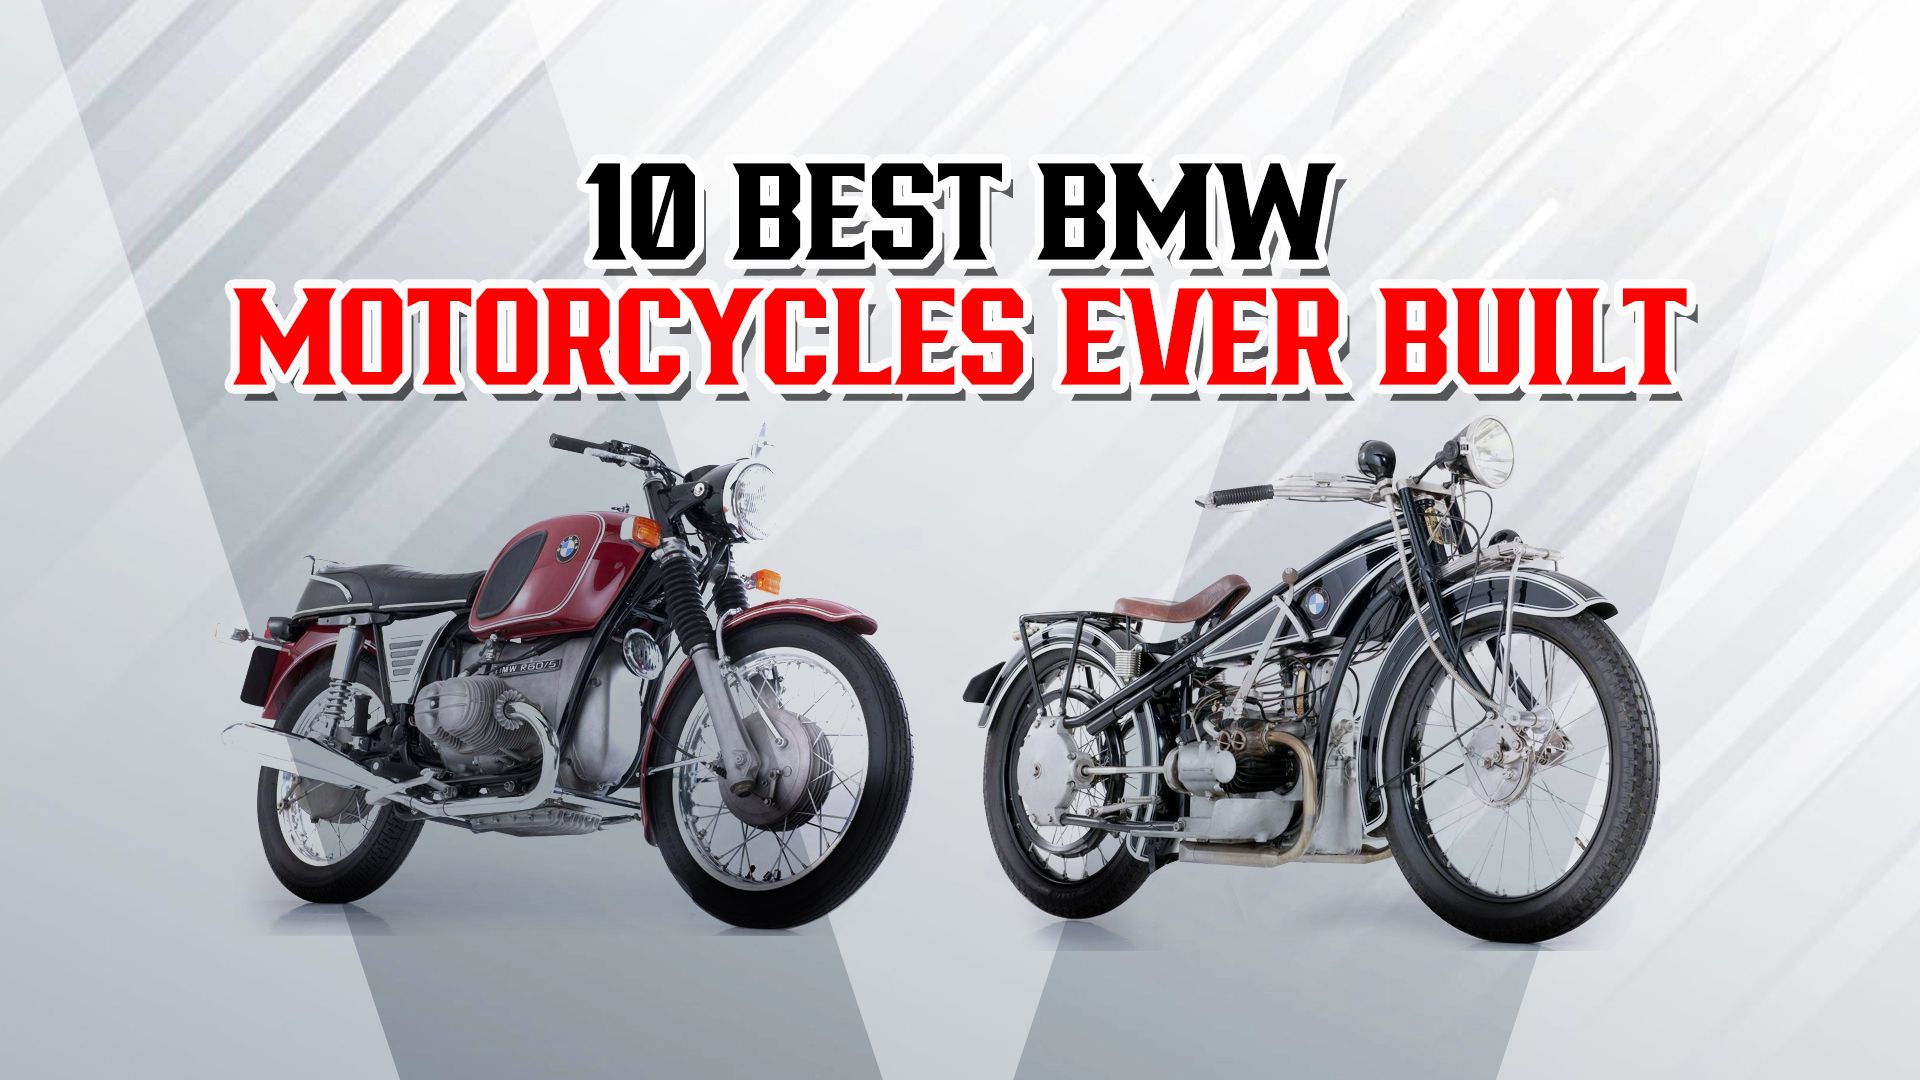 10 Best BMW Motorcycles Ever Built